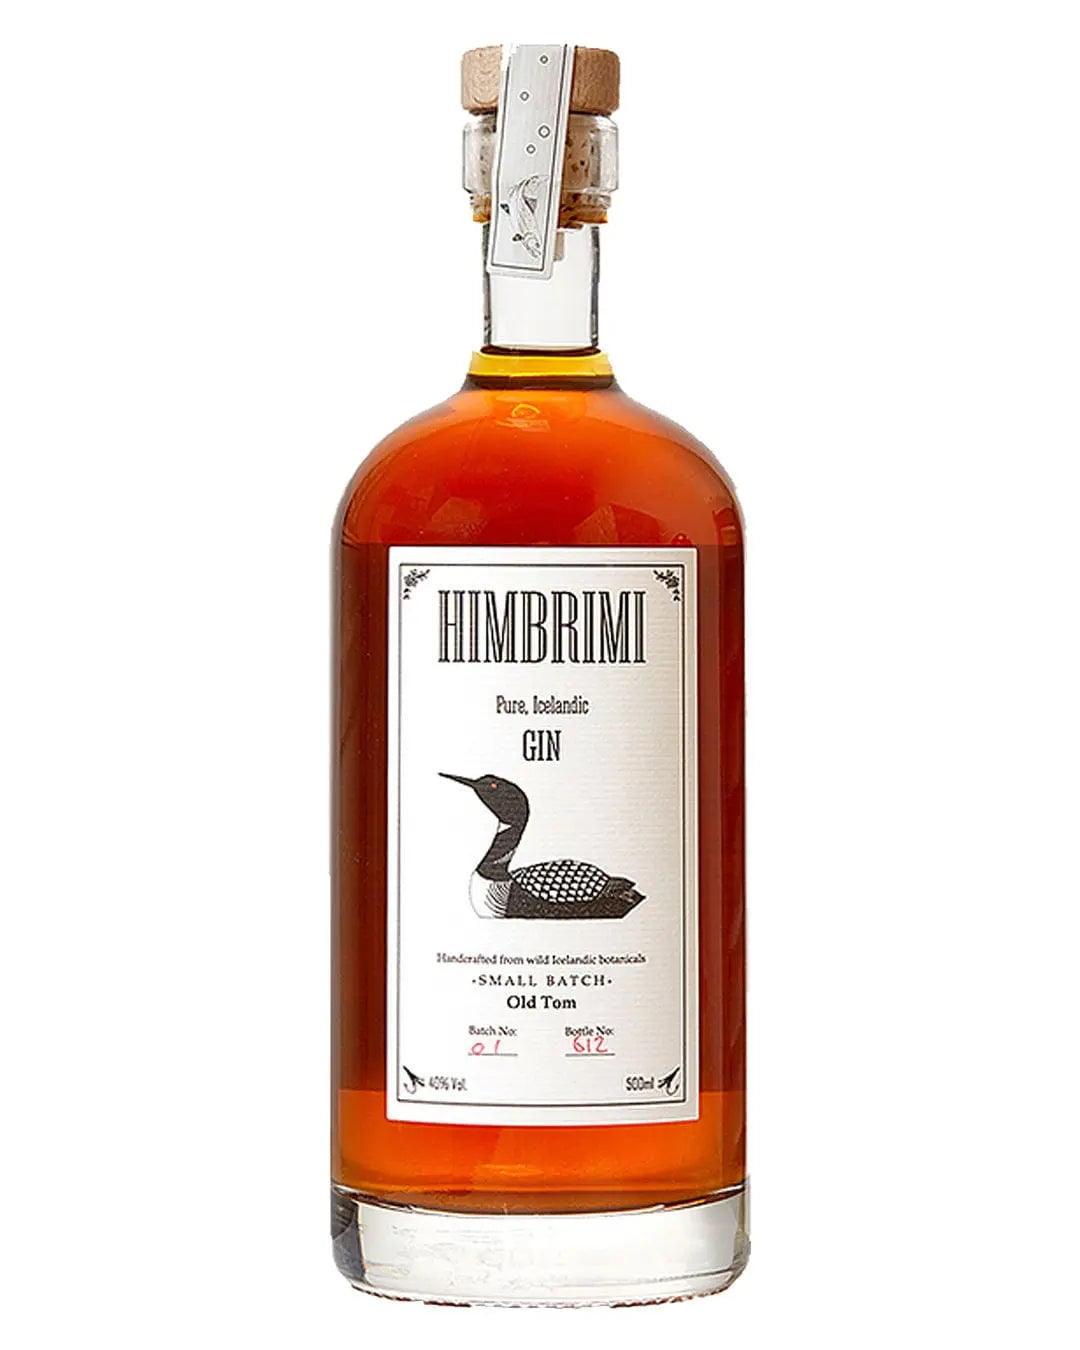 Himbrimi Old Tom Gin, 50 cl Gin